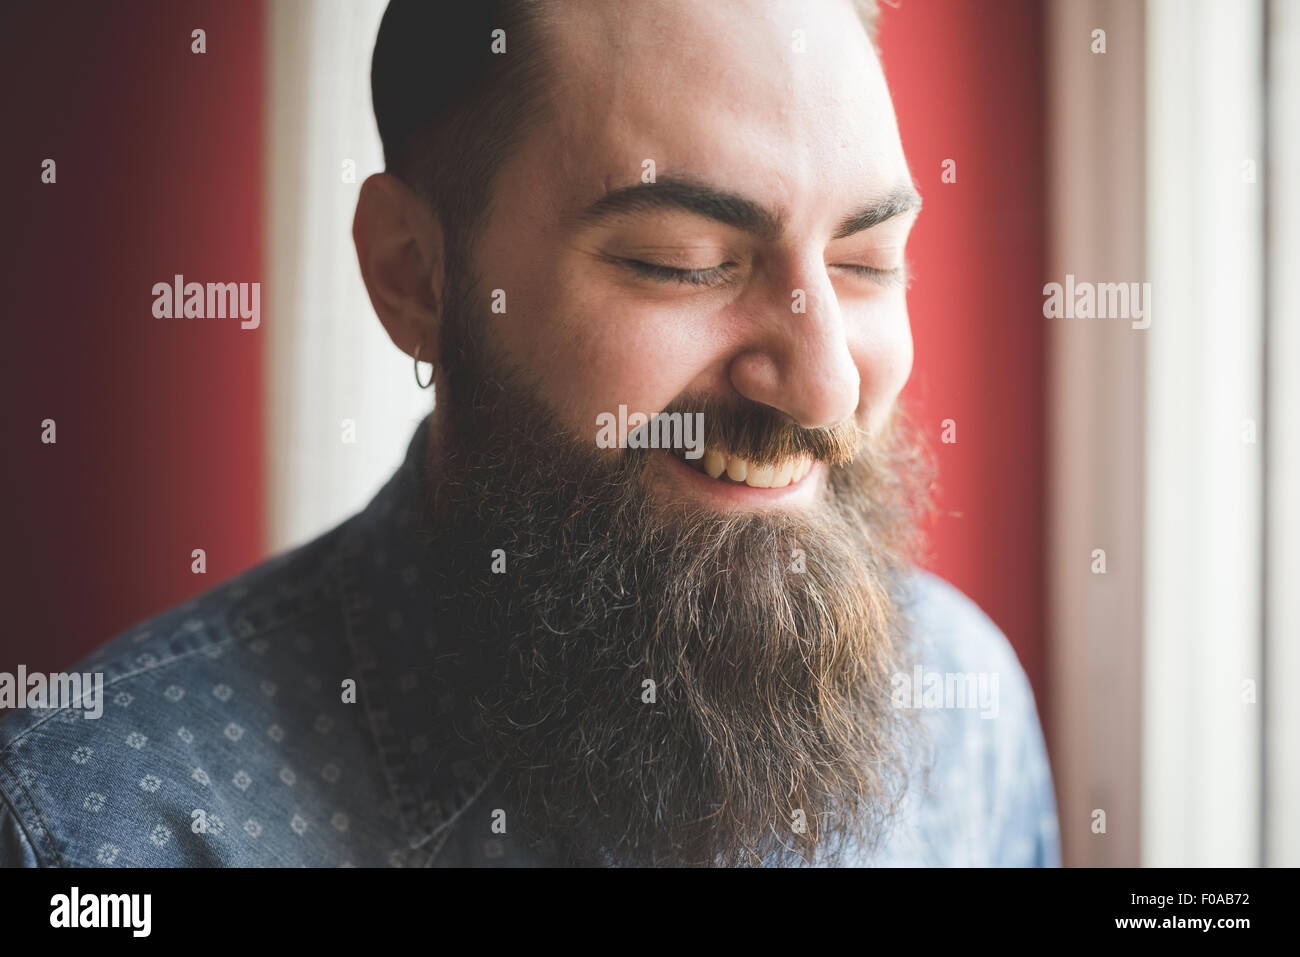 Portrait of young bearded man Stock Photo